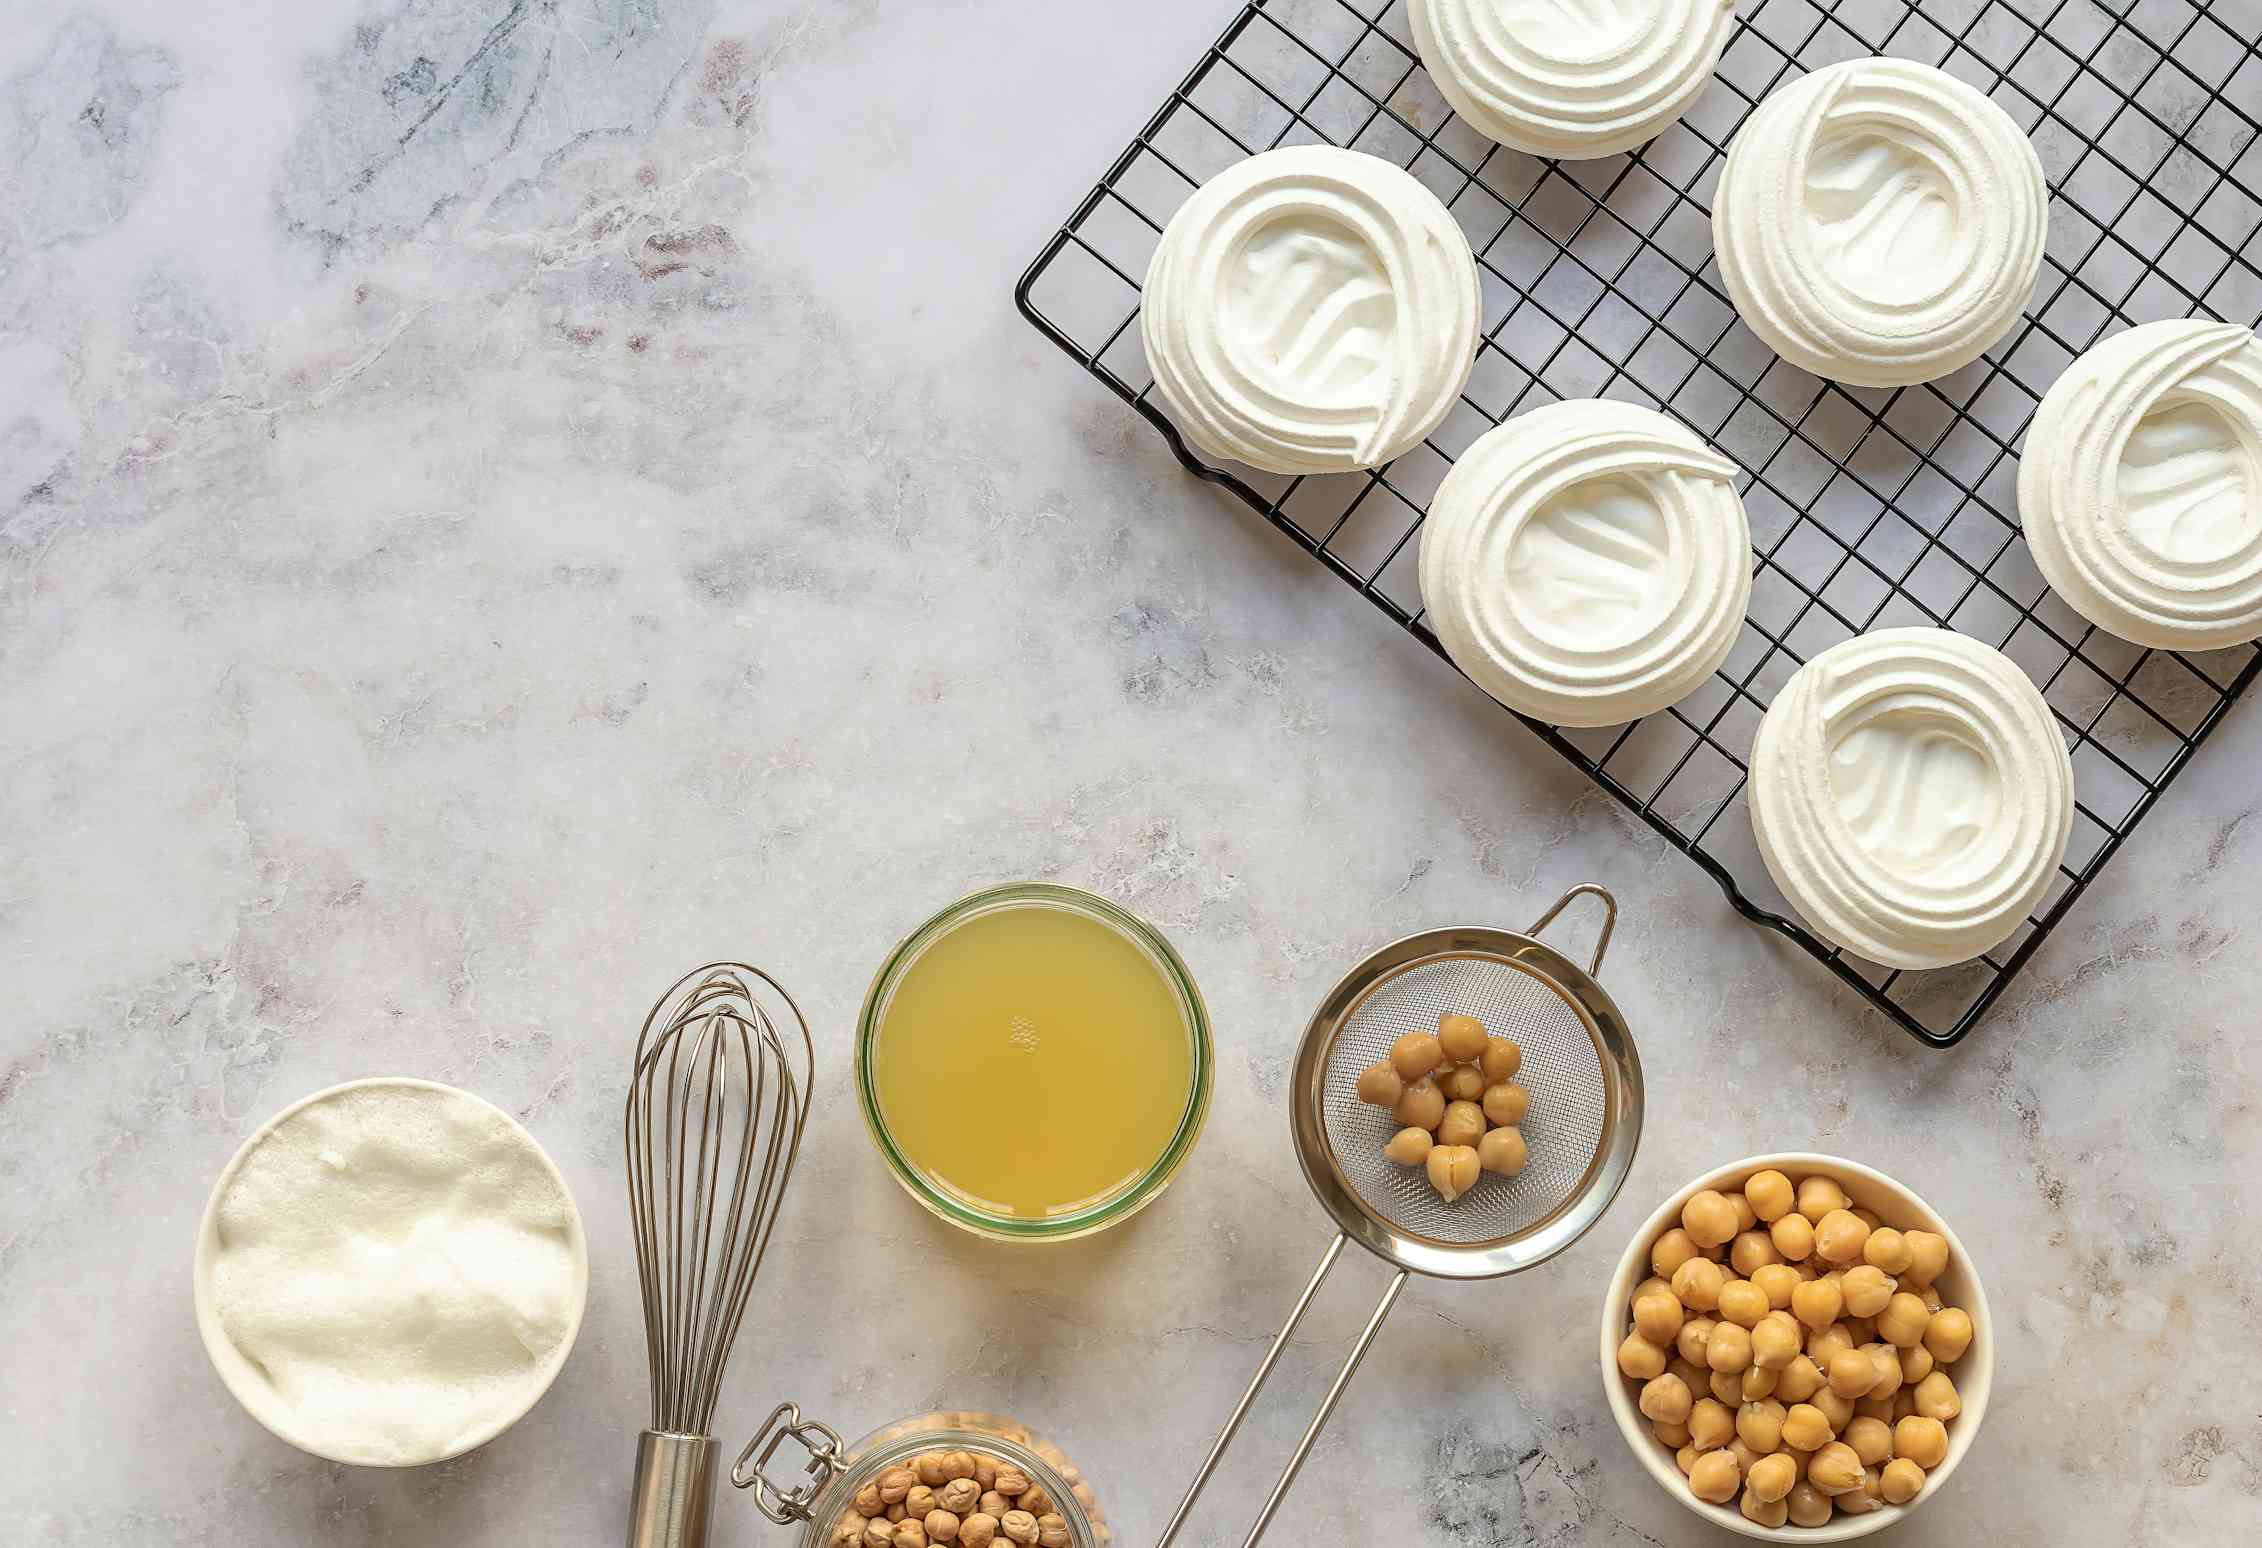 Meringues and chickpeas.